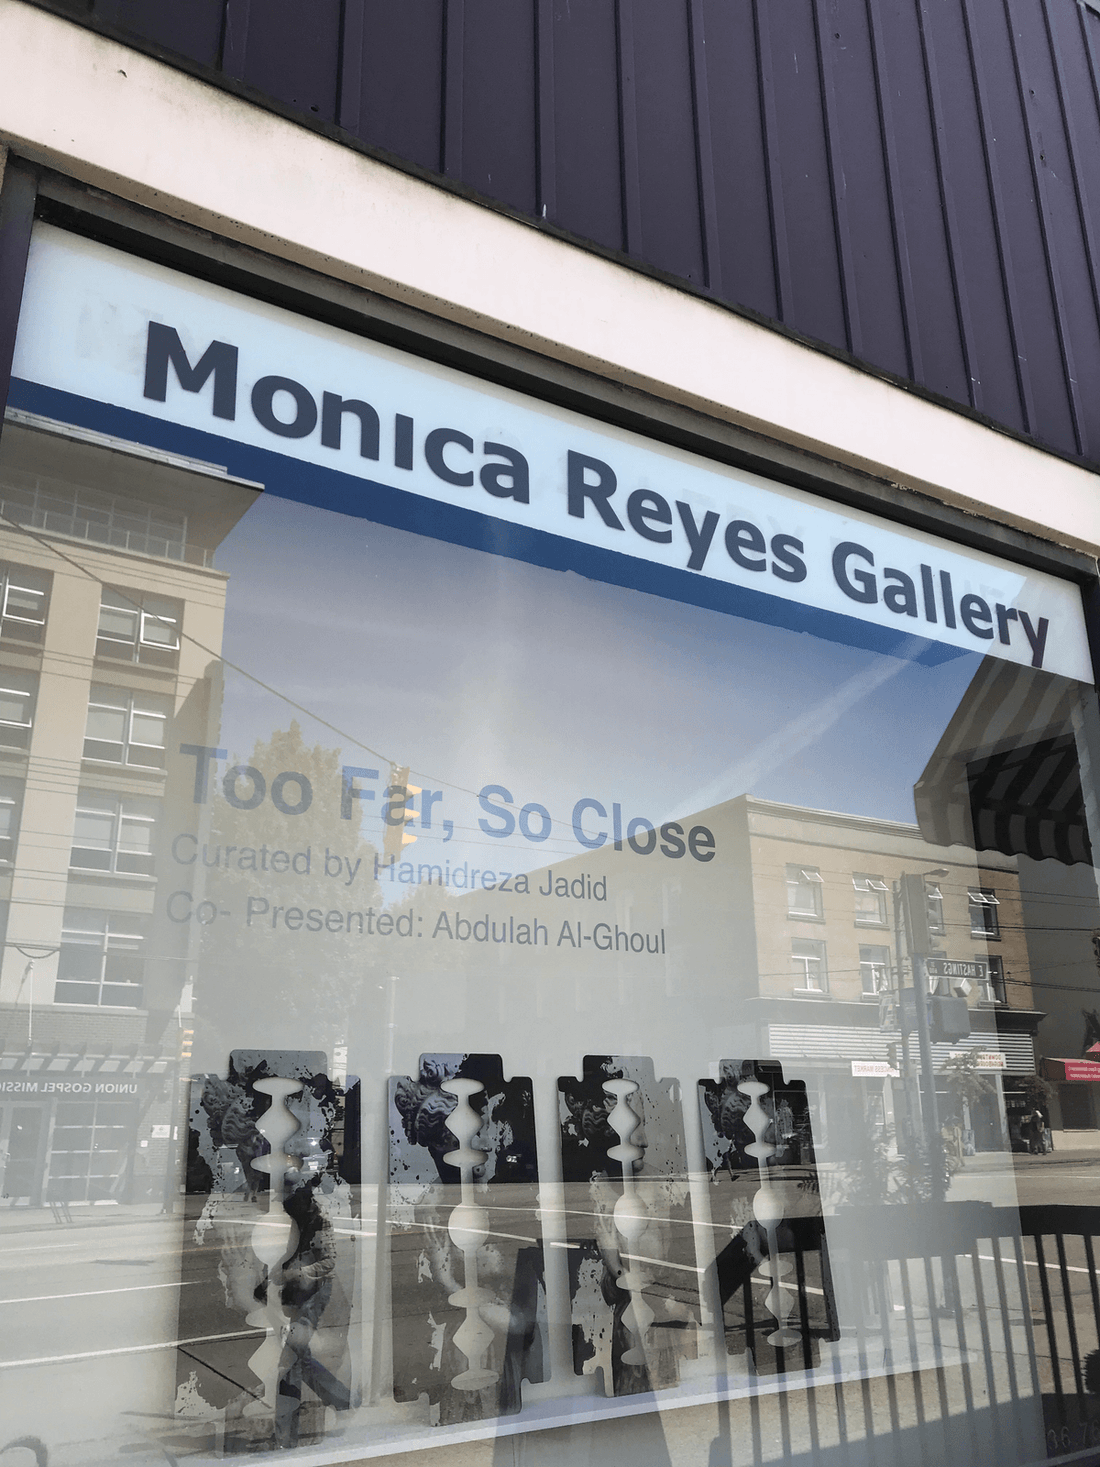 Announcing "Too Far, So Close": our Début Live Exhibition at Monica Reyes Gallery in Vancouver, BC